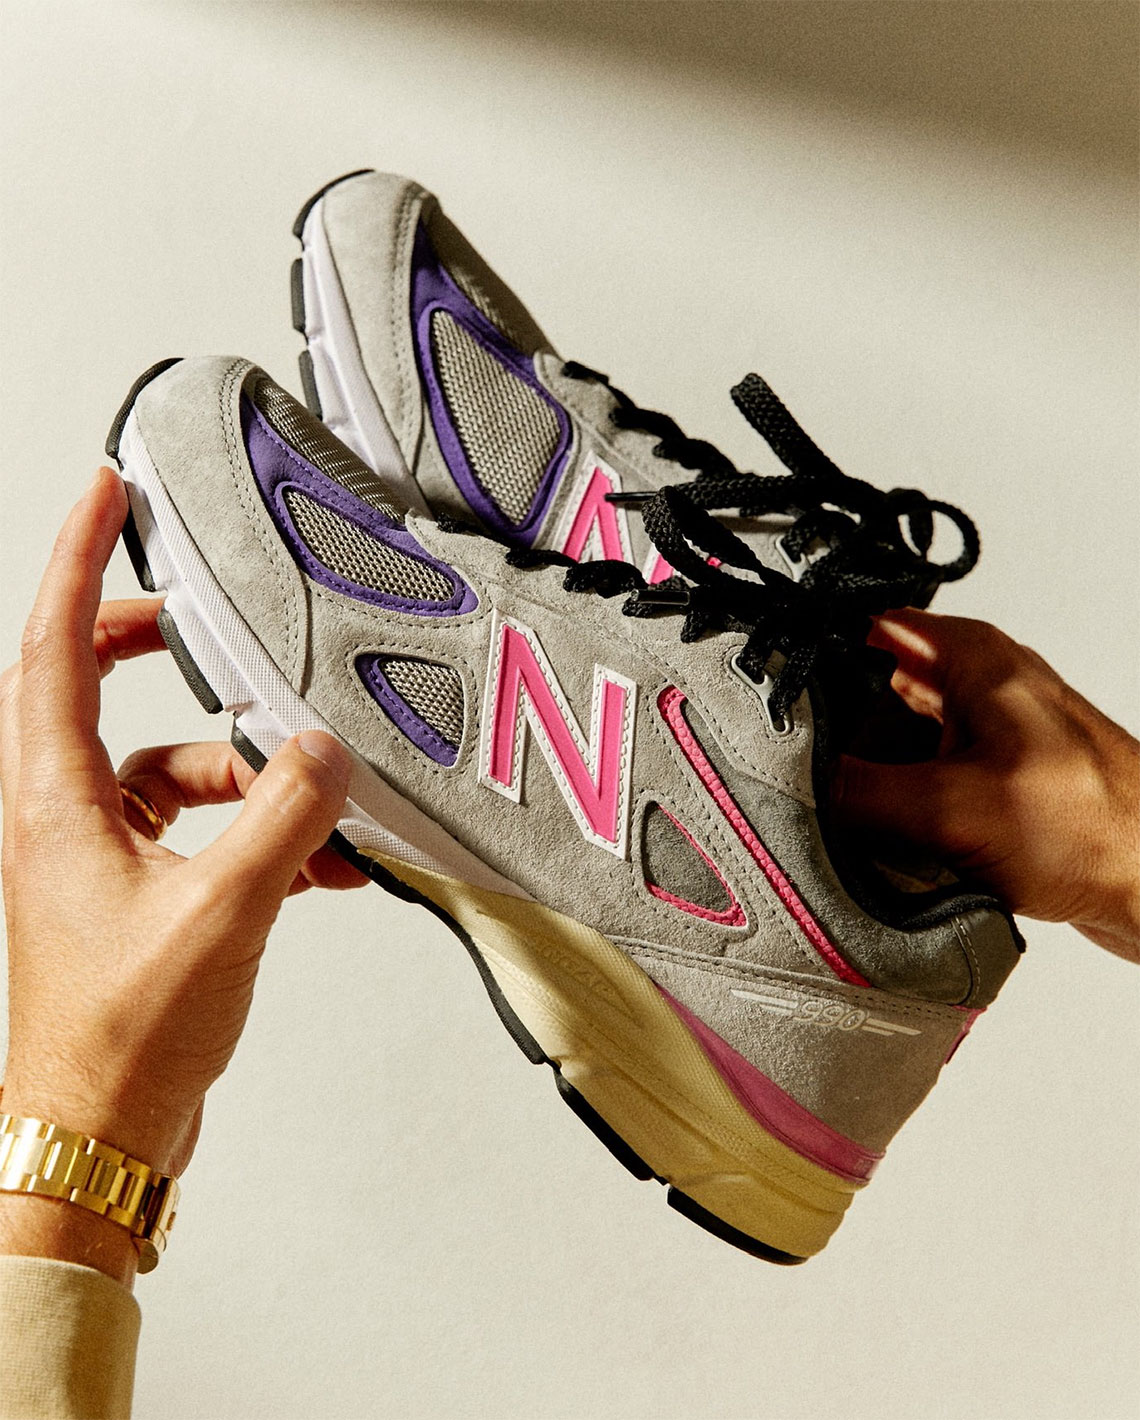 shared images of two Come Home The Kids Miss You-themed New Balance 550s on